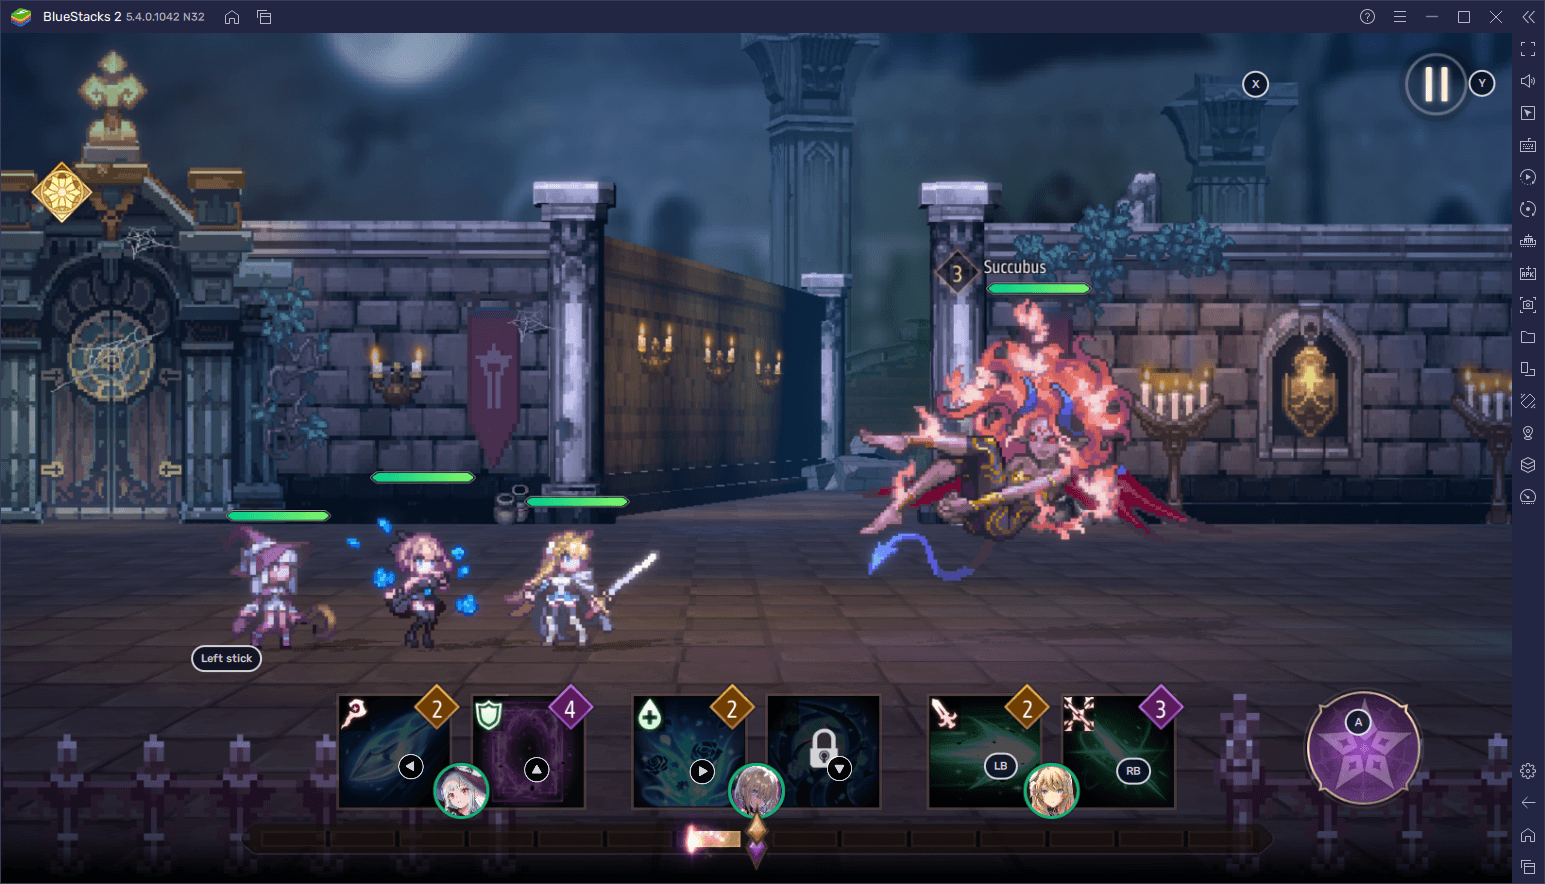 Revived Witch on PC - How to Get the Best Graphics, Performance, and Controls With BlueStacks